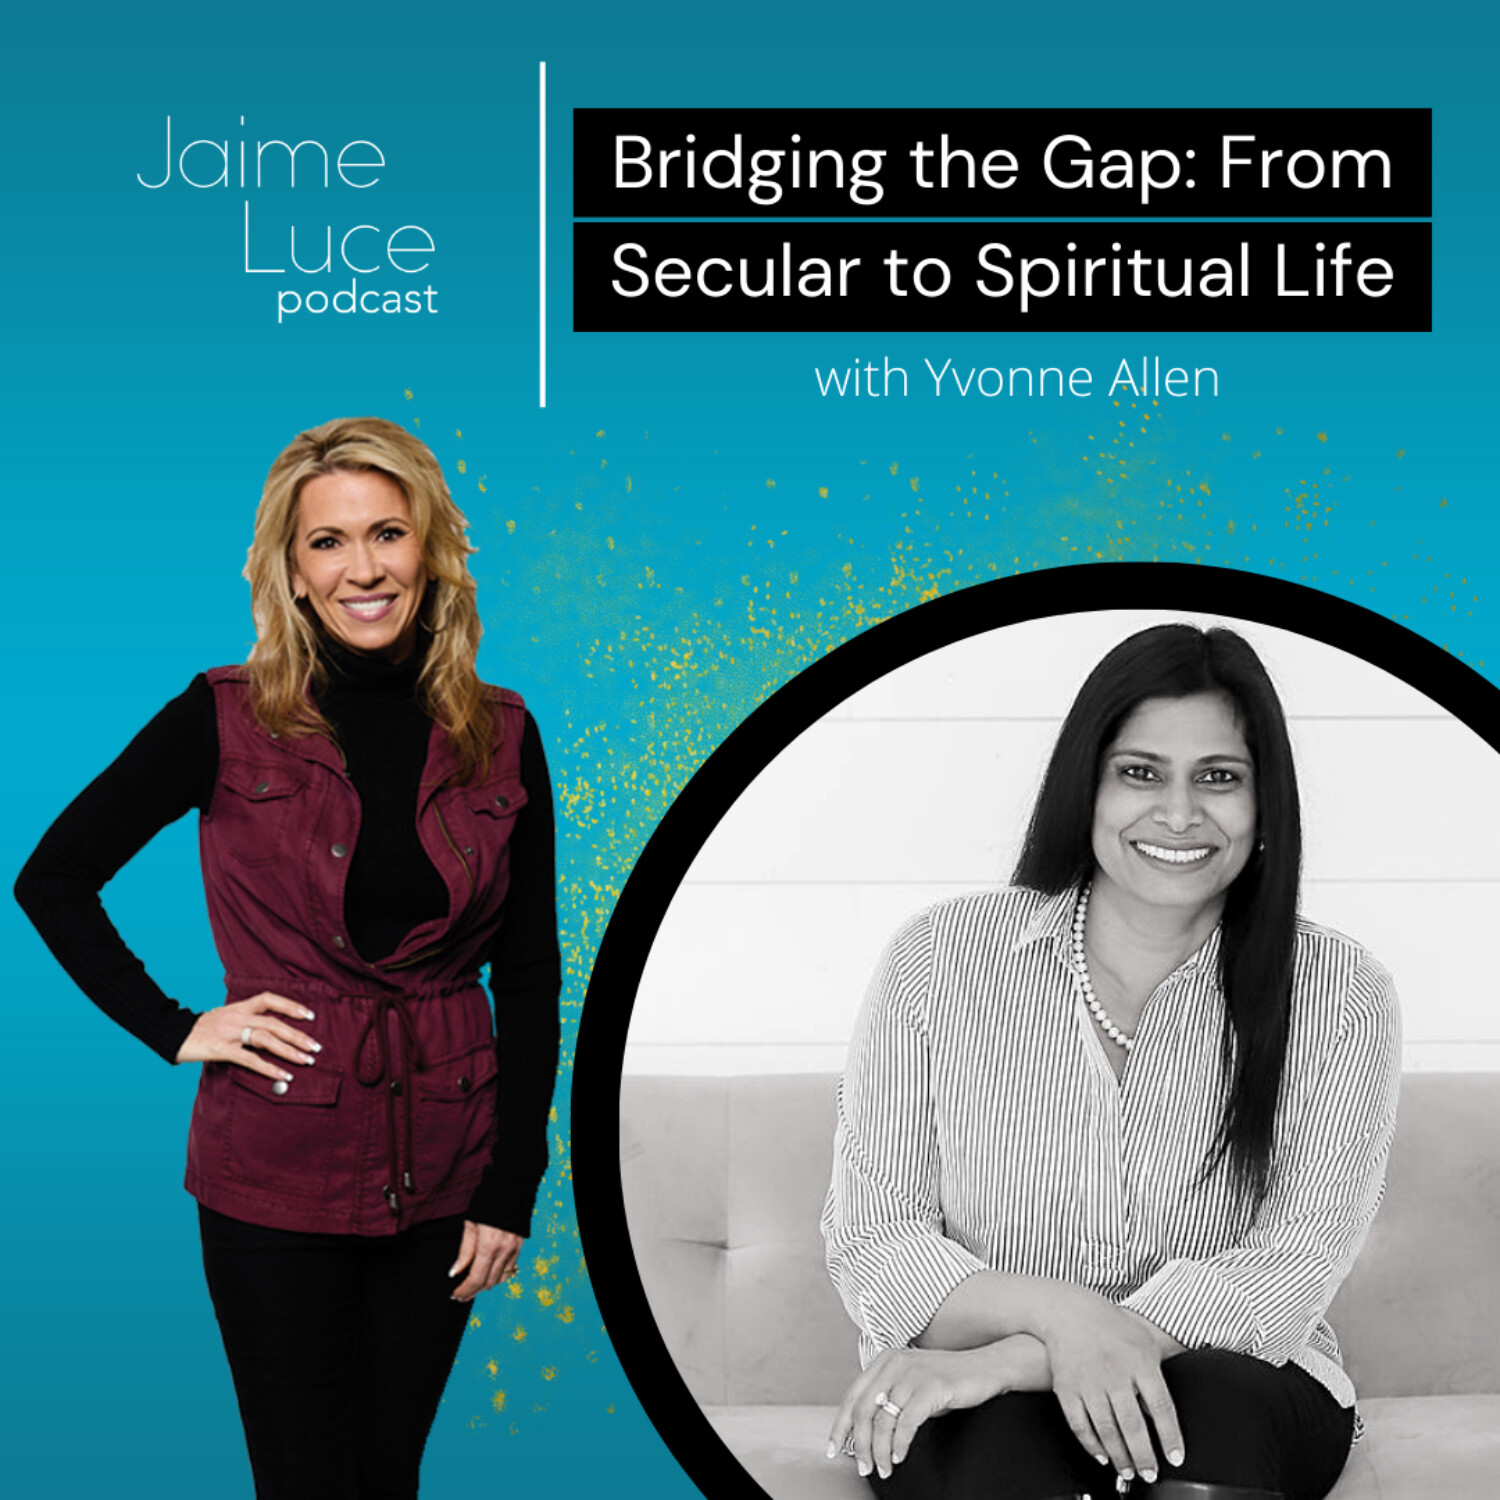 Bridging the Gap: From Secular to Spiritual Life with Yvonne Allen